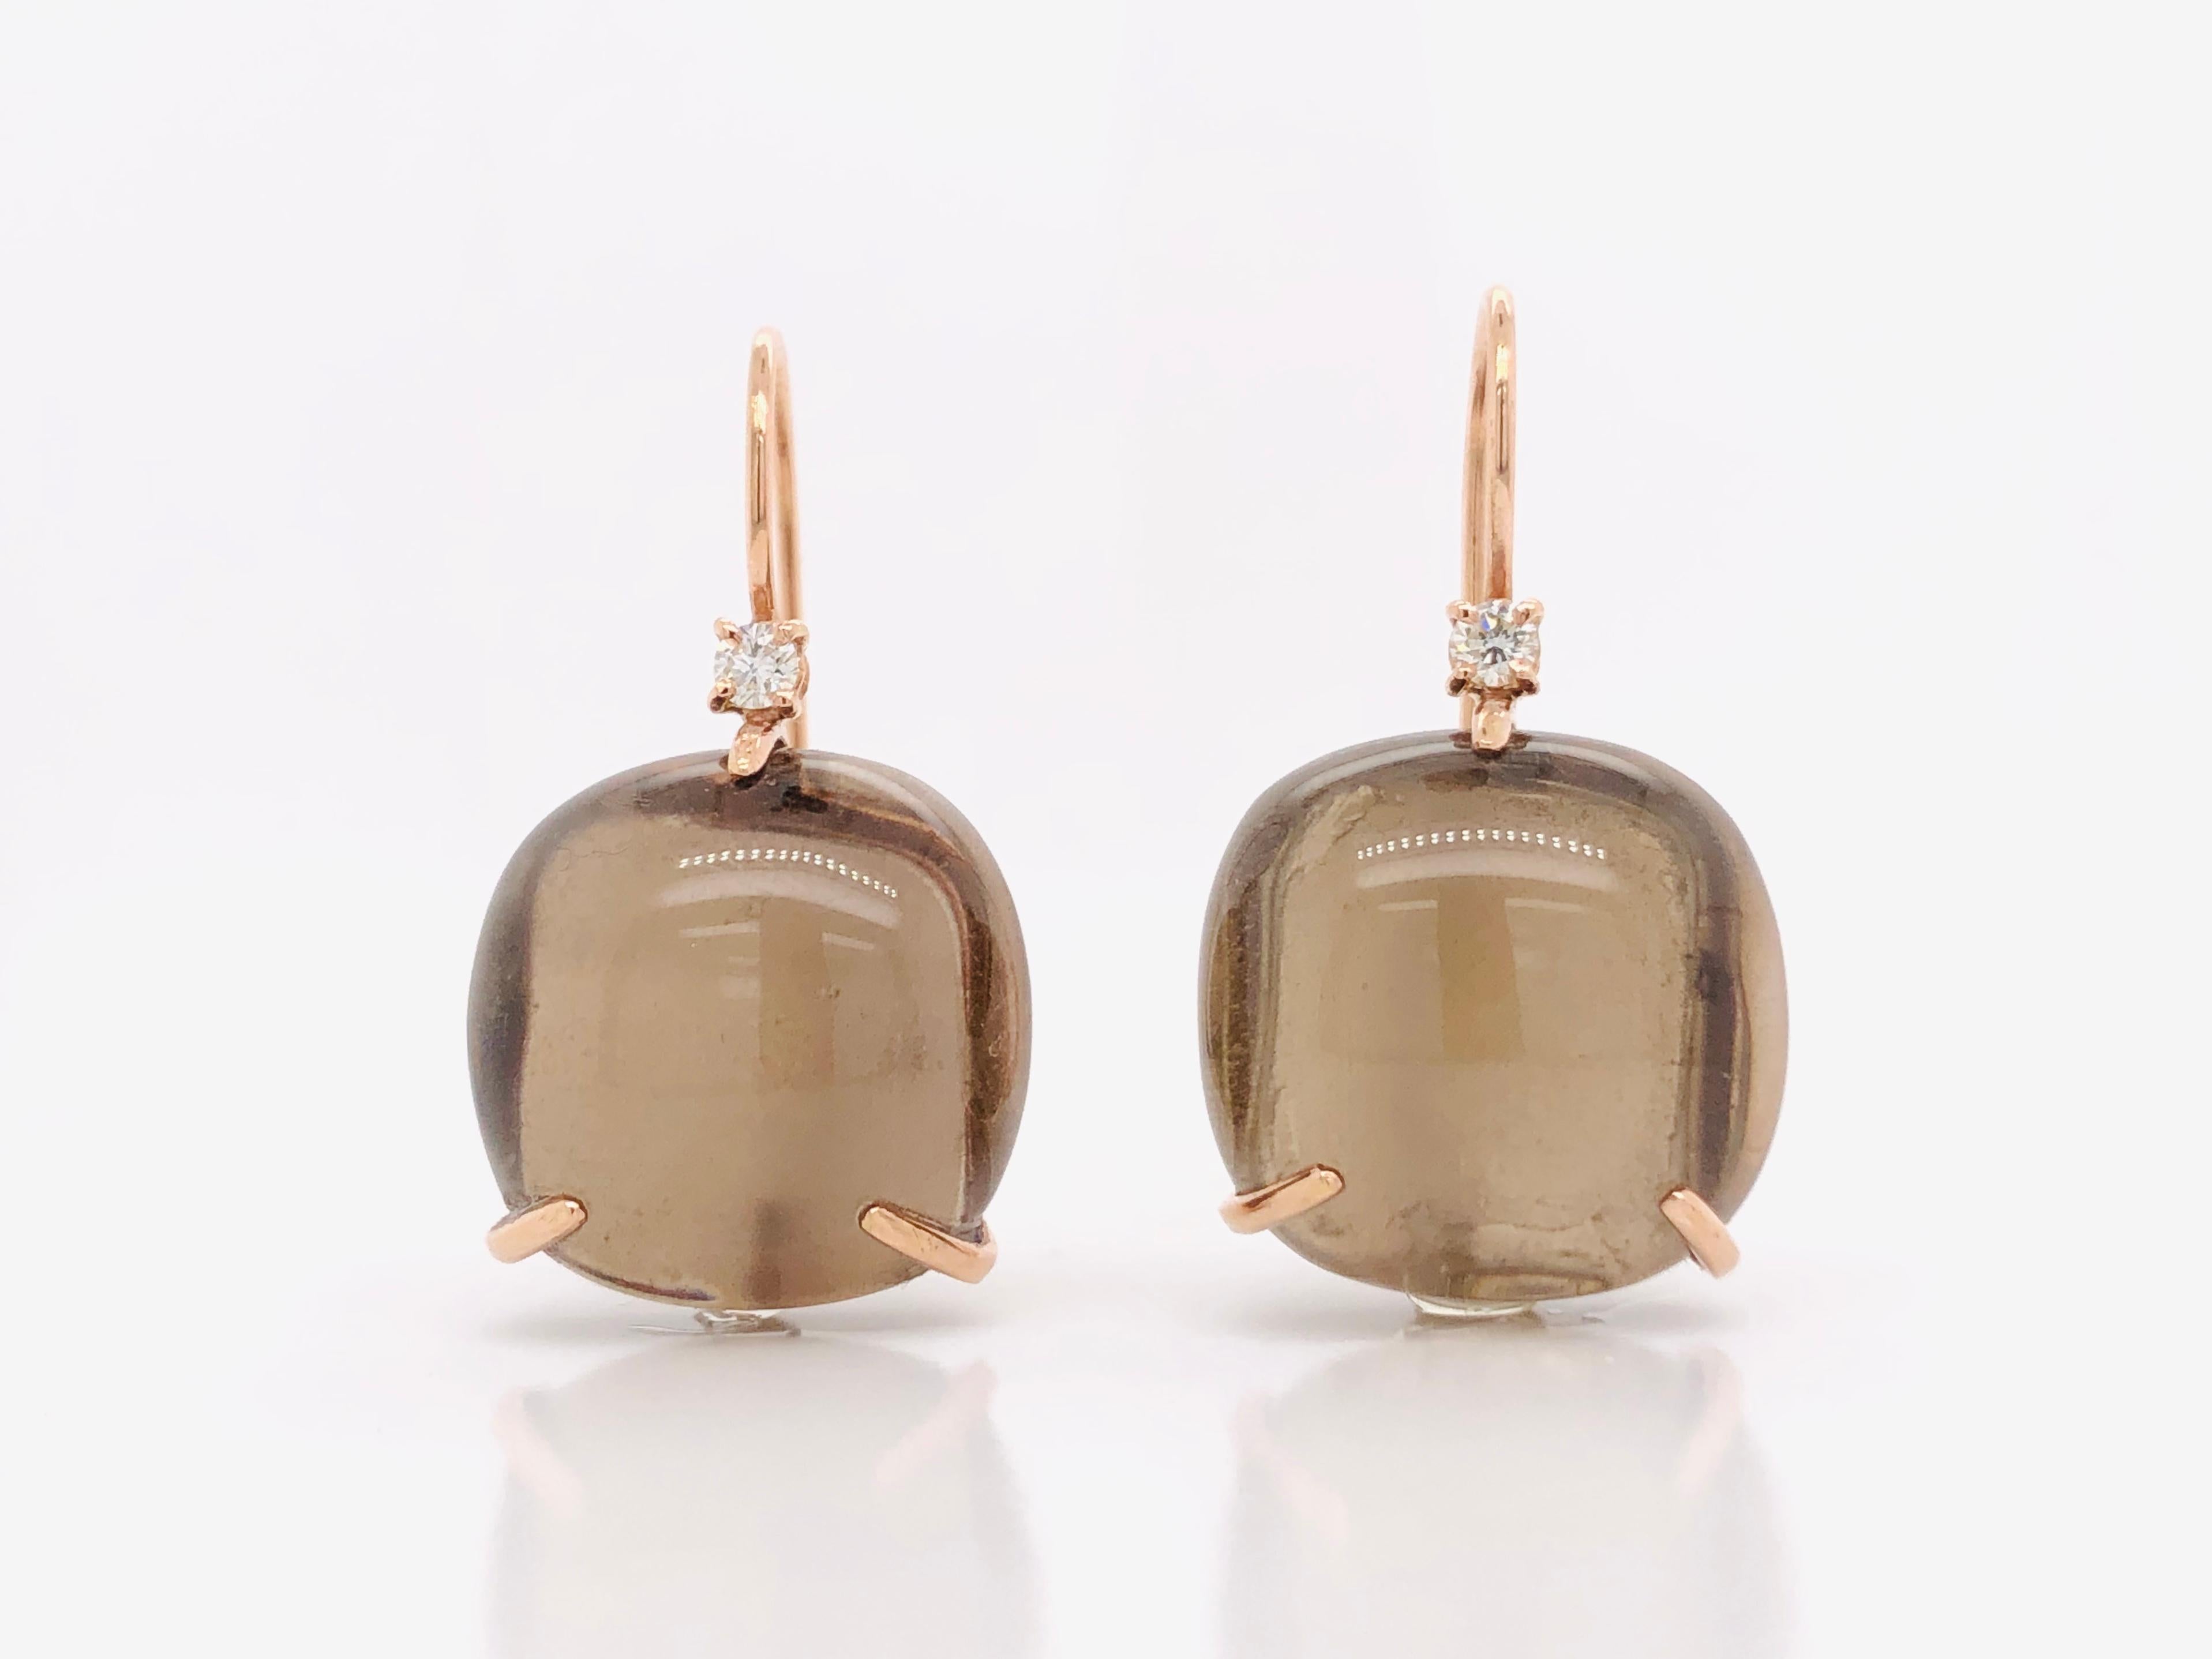 Discover these stunning earrings adorned with two beautiful smoky quartz stones. The brown and grey hues of smoky quartz add a touch of sophistication to this piece, while their calming properties are ideal for everyday wear. Smoky quartz is known